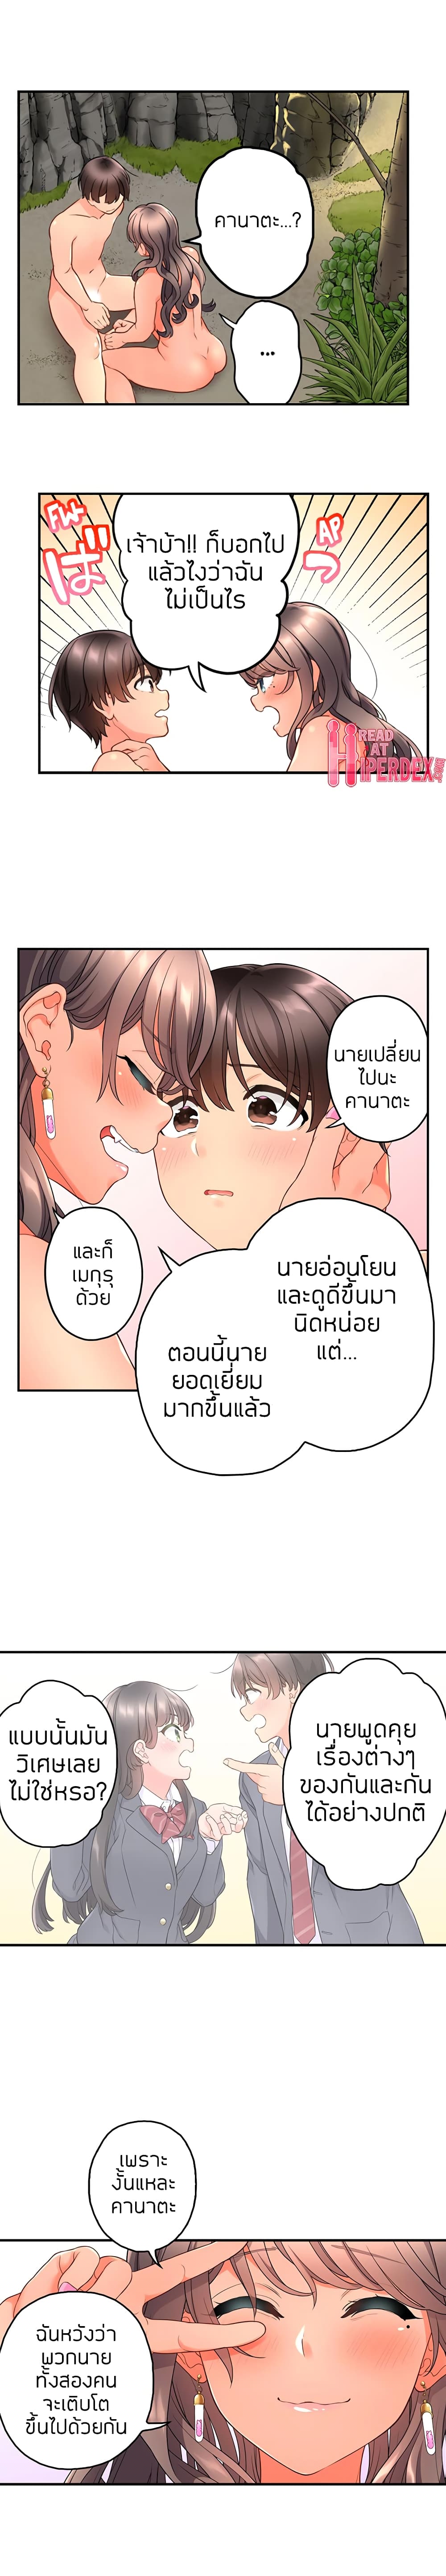 My Friend Came Back From the Future to Fuck Me 27-ตอนจบ